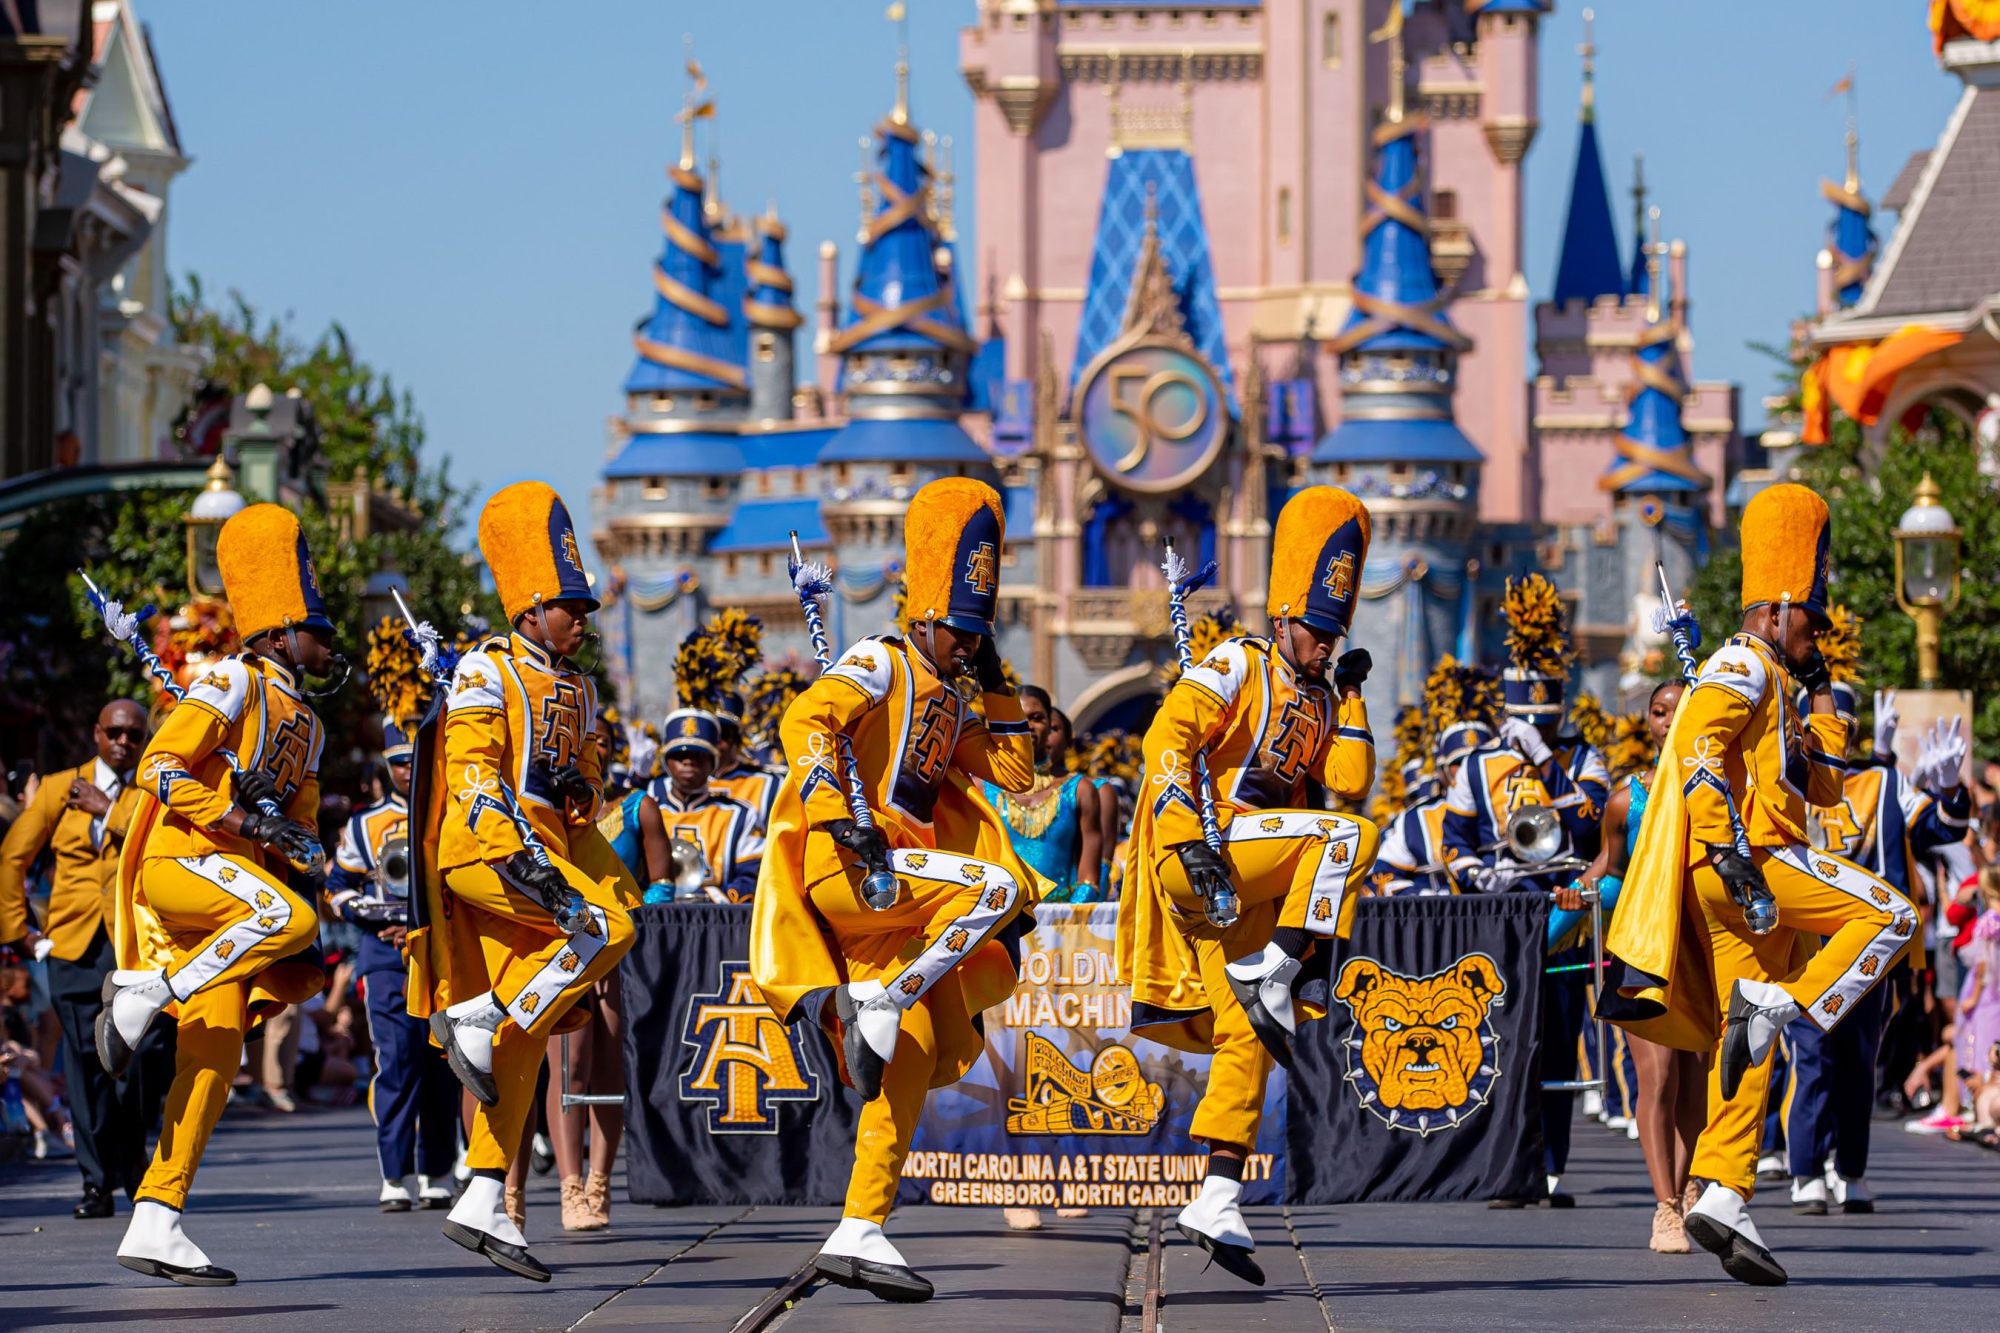 Winston-Salem State, North Carolina A&T State, Alcorn State and Delaware State marching bands served as honorary grand marshals, October 8, 2022, in two parades during HBCU Week at Magic Kingdom Park at Walt Disney World Resort in Lake Buena Vista, Fla. They thrilled guests as they traveled down Main Street, U.S.A., led by none other than Drum Major Mickey Mouse, who showed off his own show-stopping moves in his signature marching band uniform. (Courtney Kiefer, photographer).